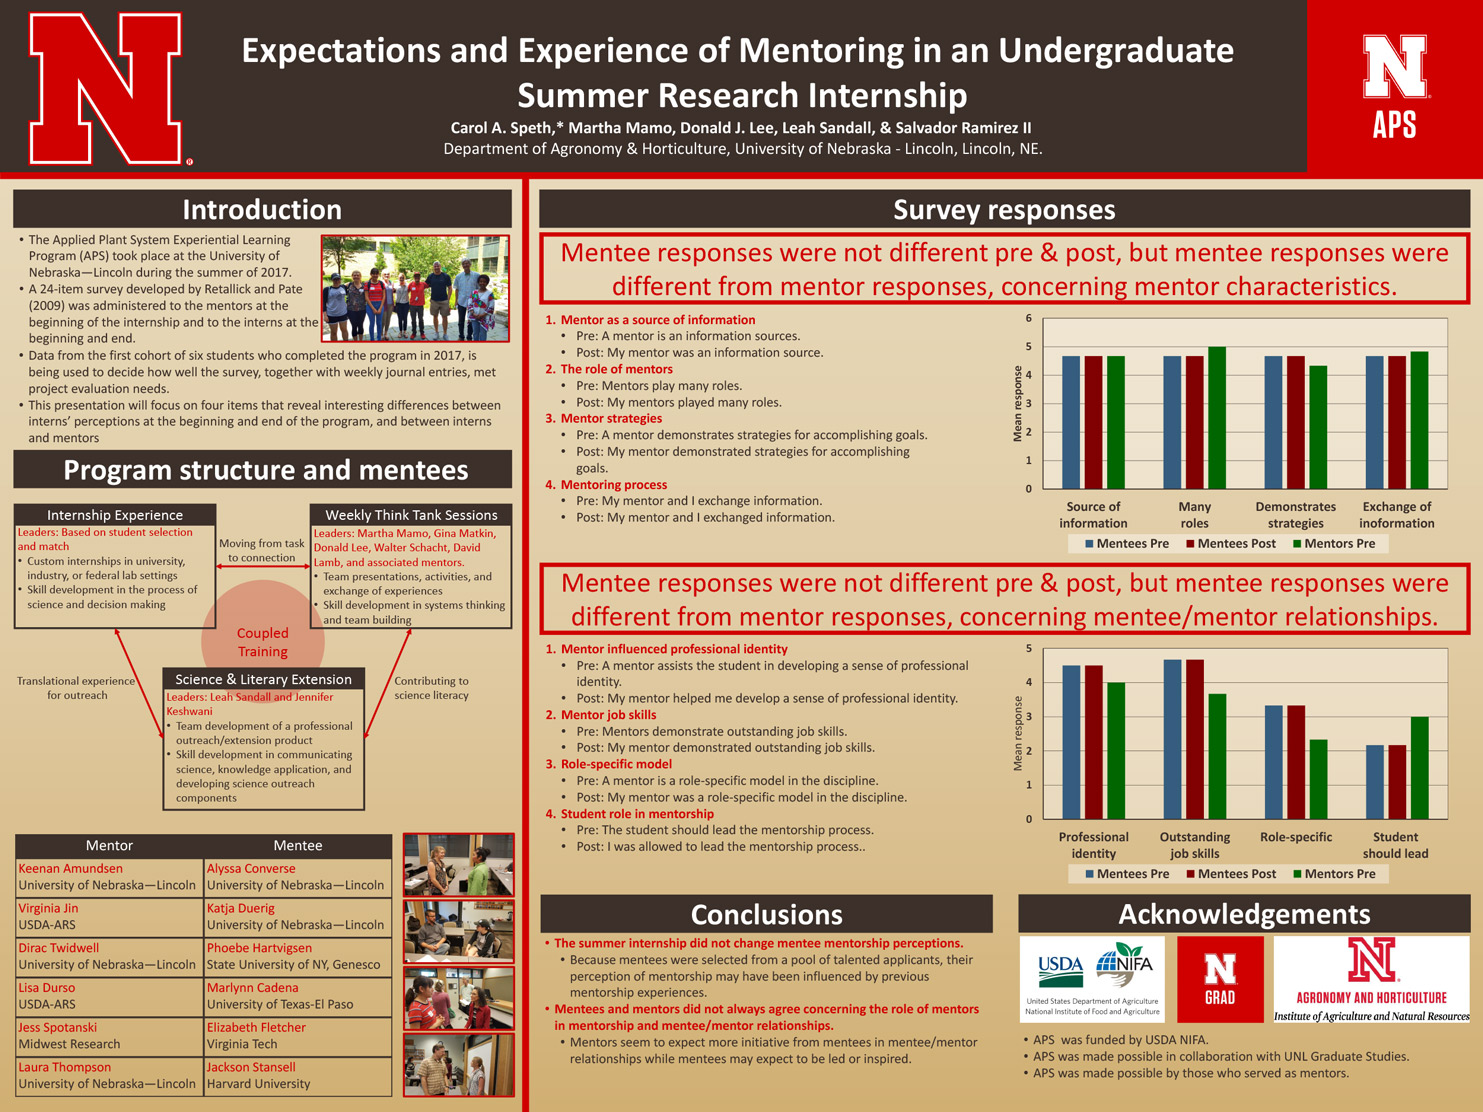 Expectations and Experience of Mentoring in an Undergraduate Summer Research Internship poster